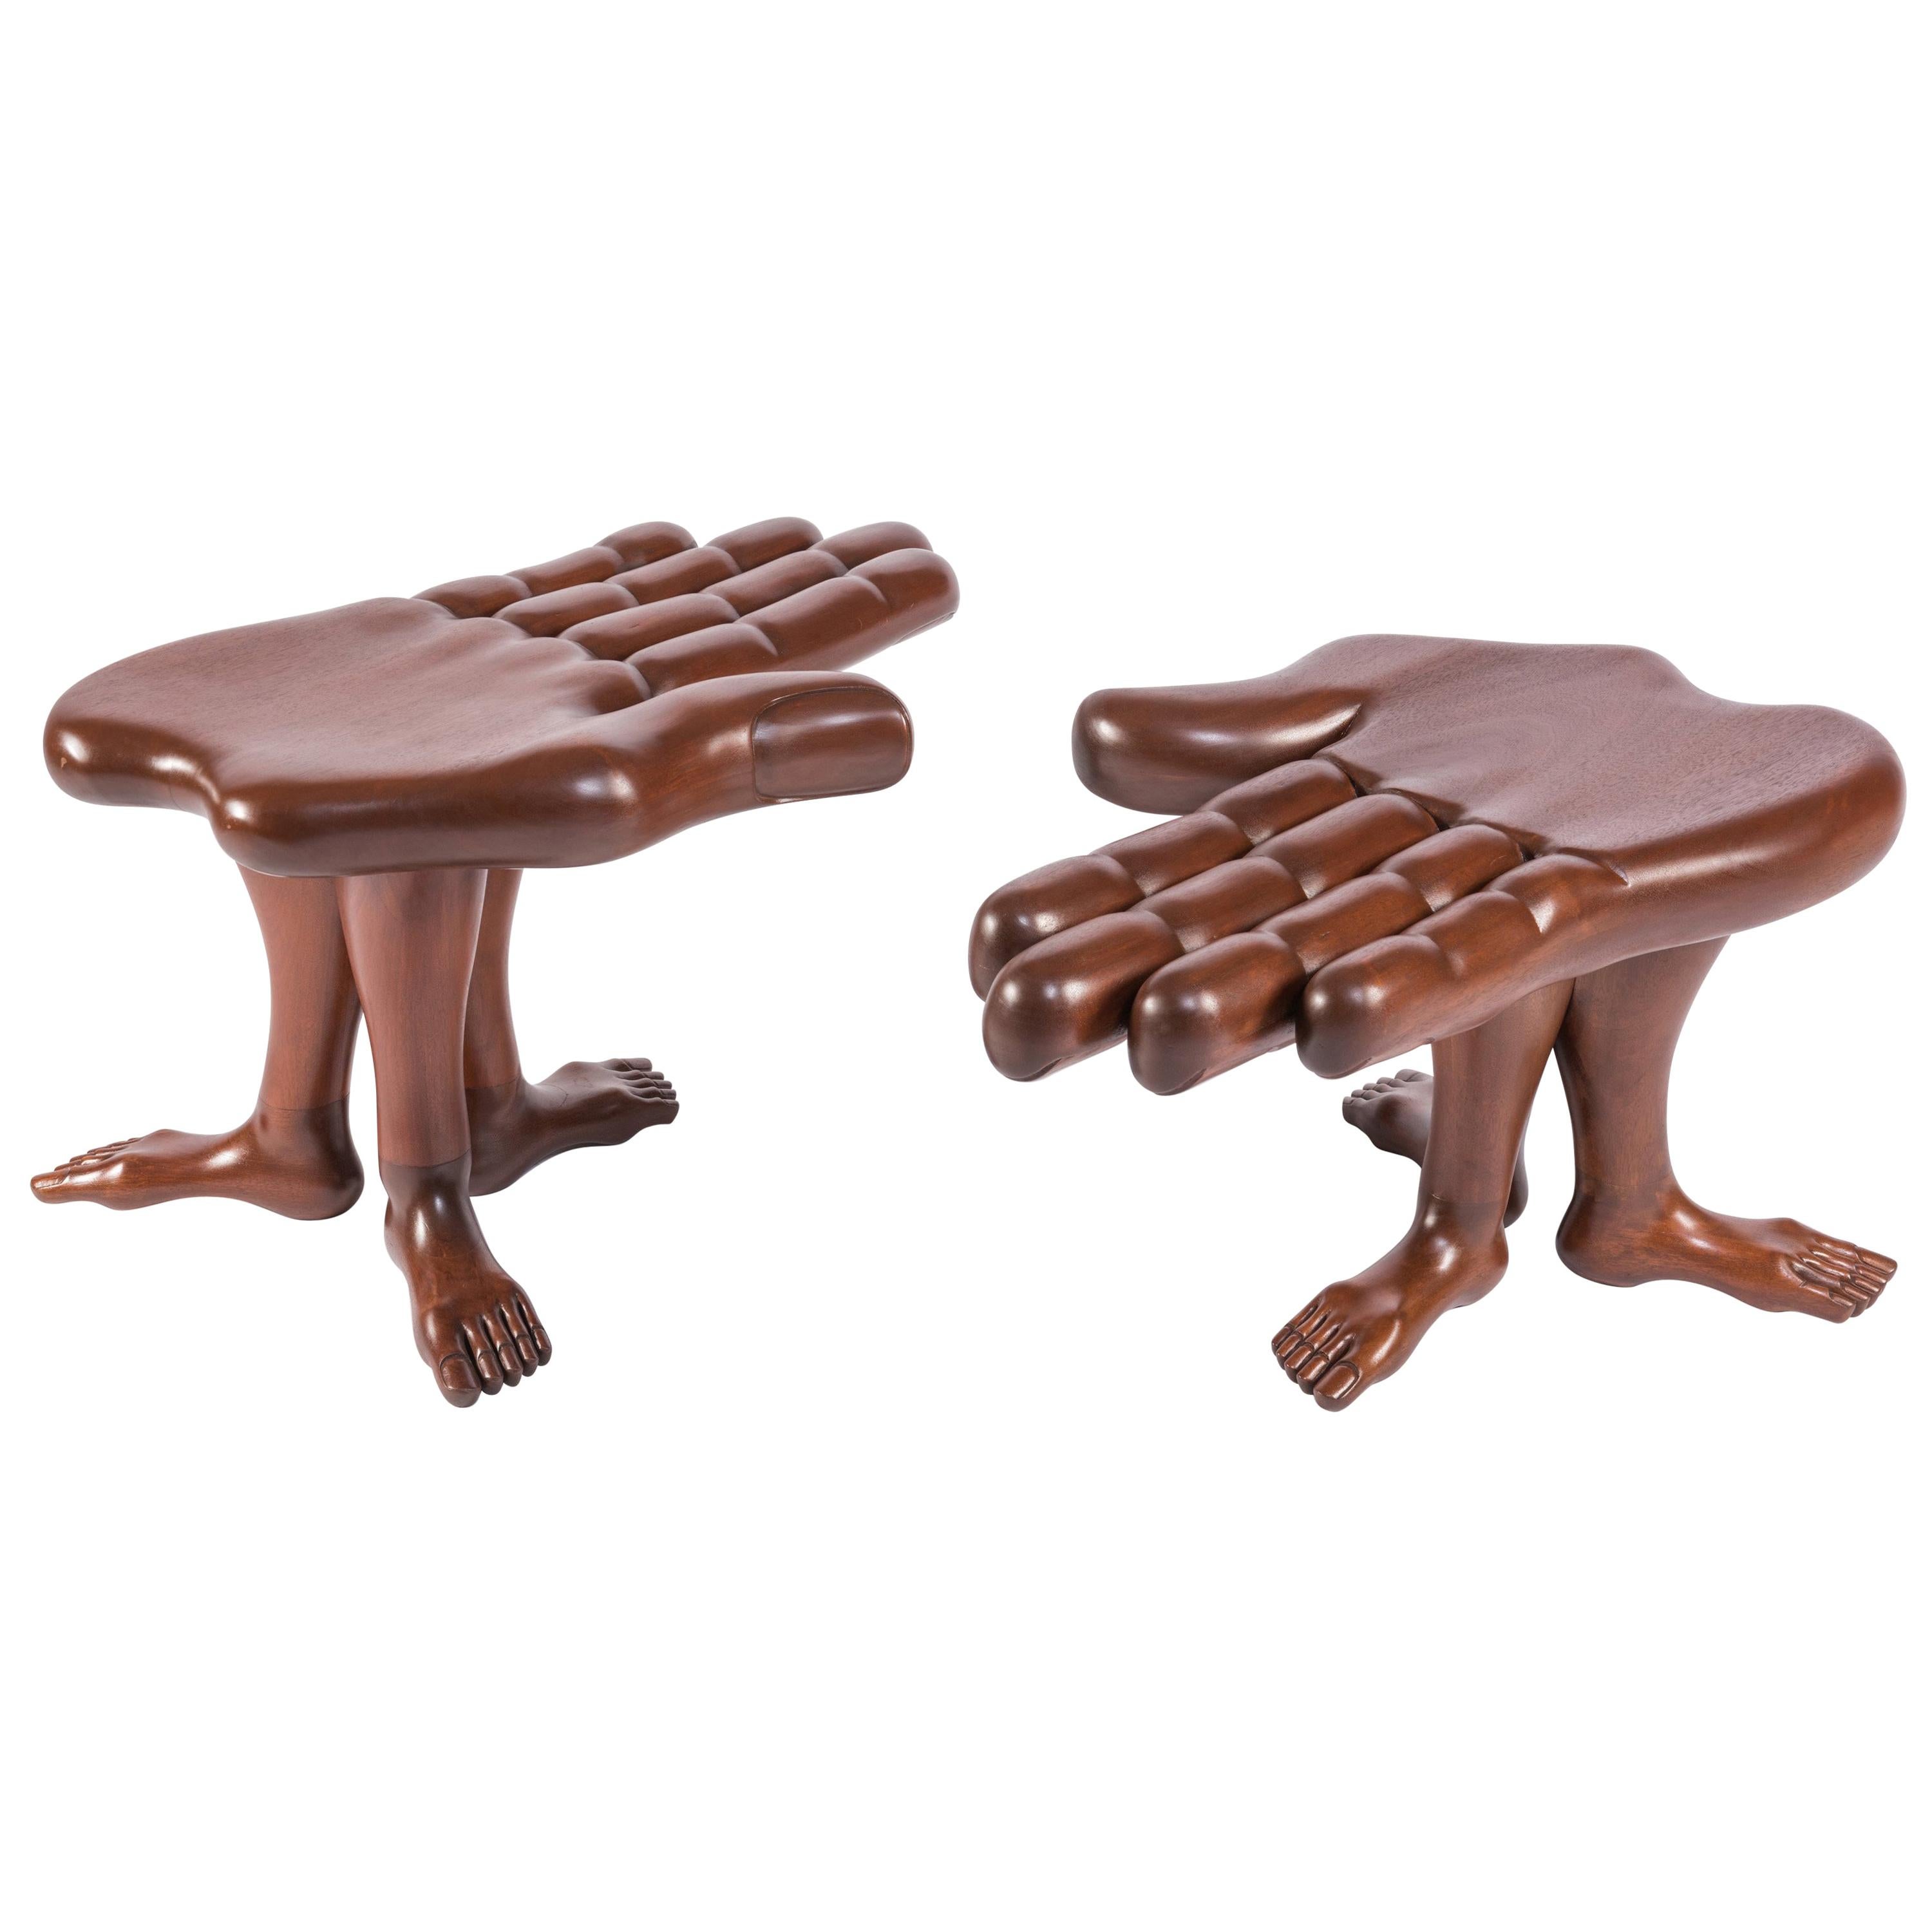 Pair of Hand and Foot Coffee Tables or Stools by Pedro Friedeberg